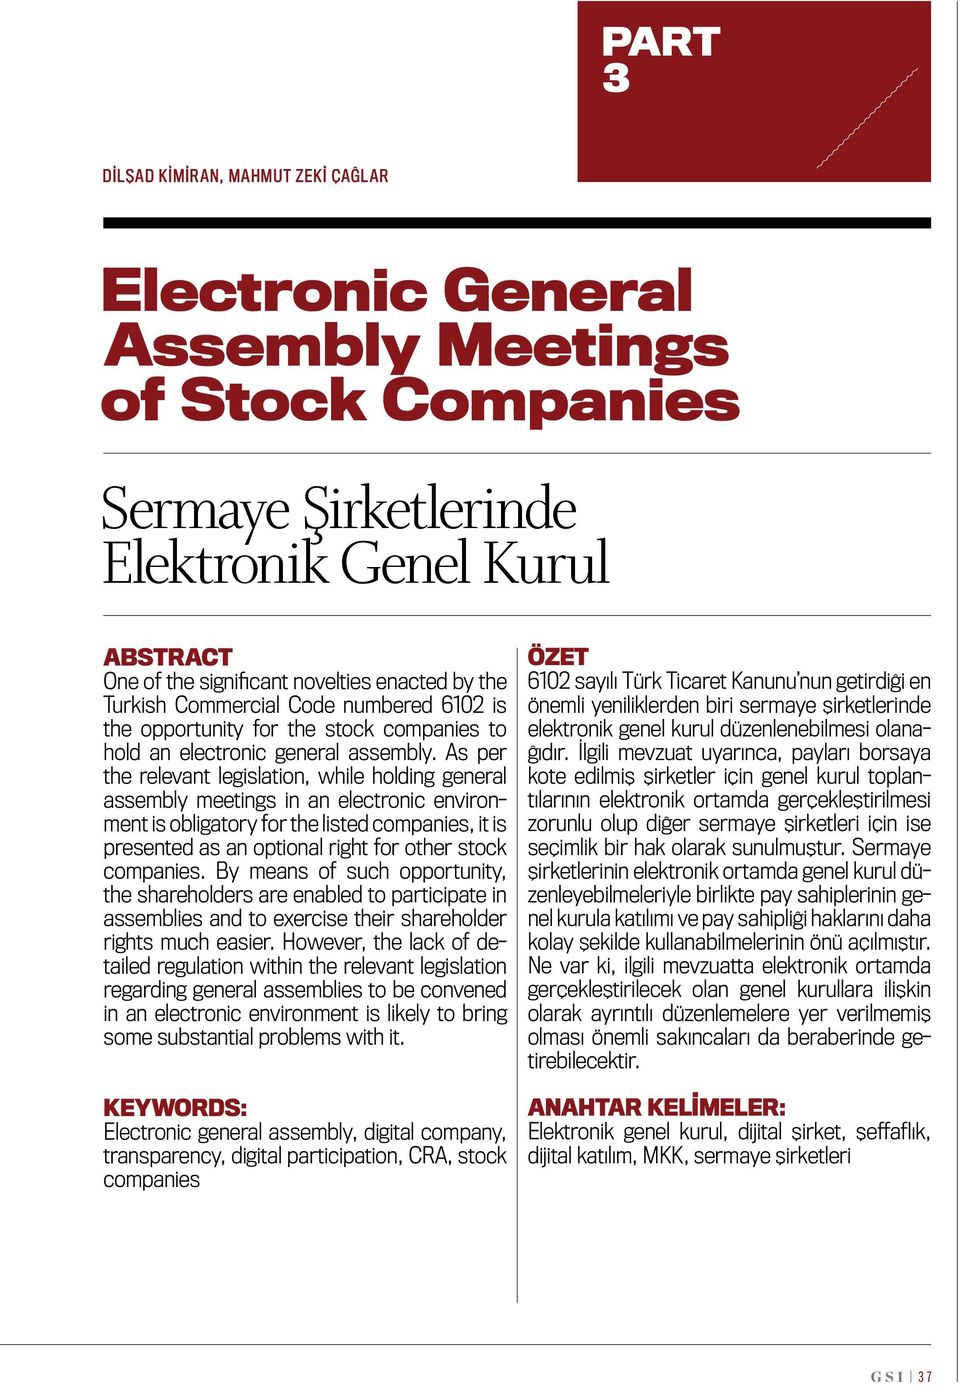 As per the relevant legislation, while holding general assembly meetings in an electronic environment is obligatory for the listed companies, it is presented as an optional right for other stock